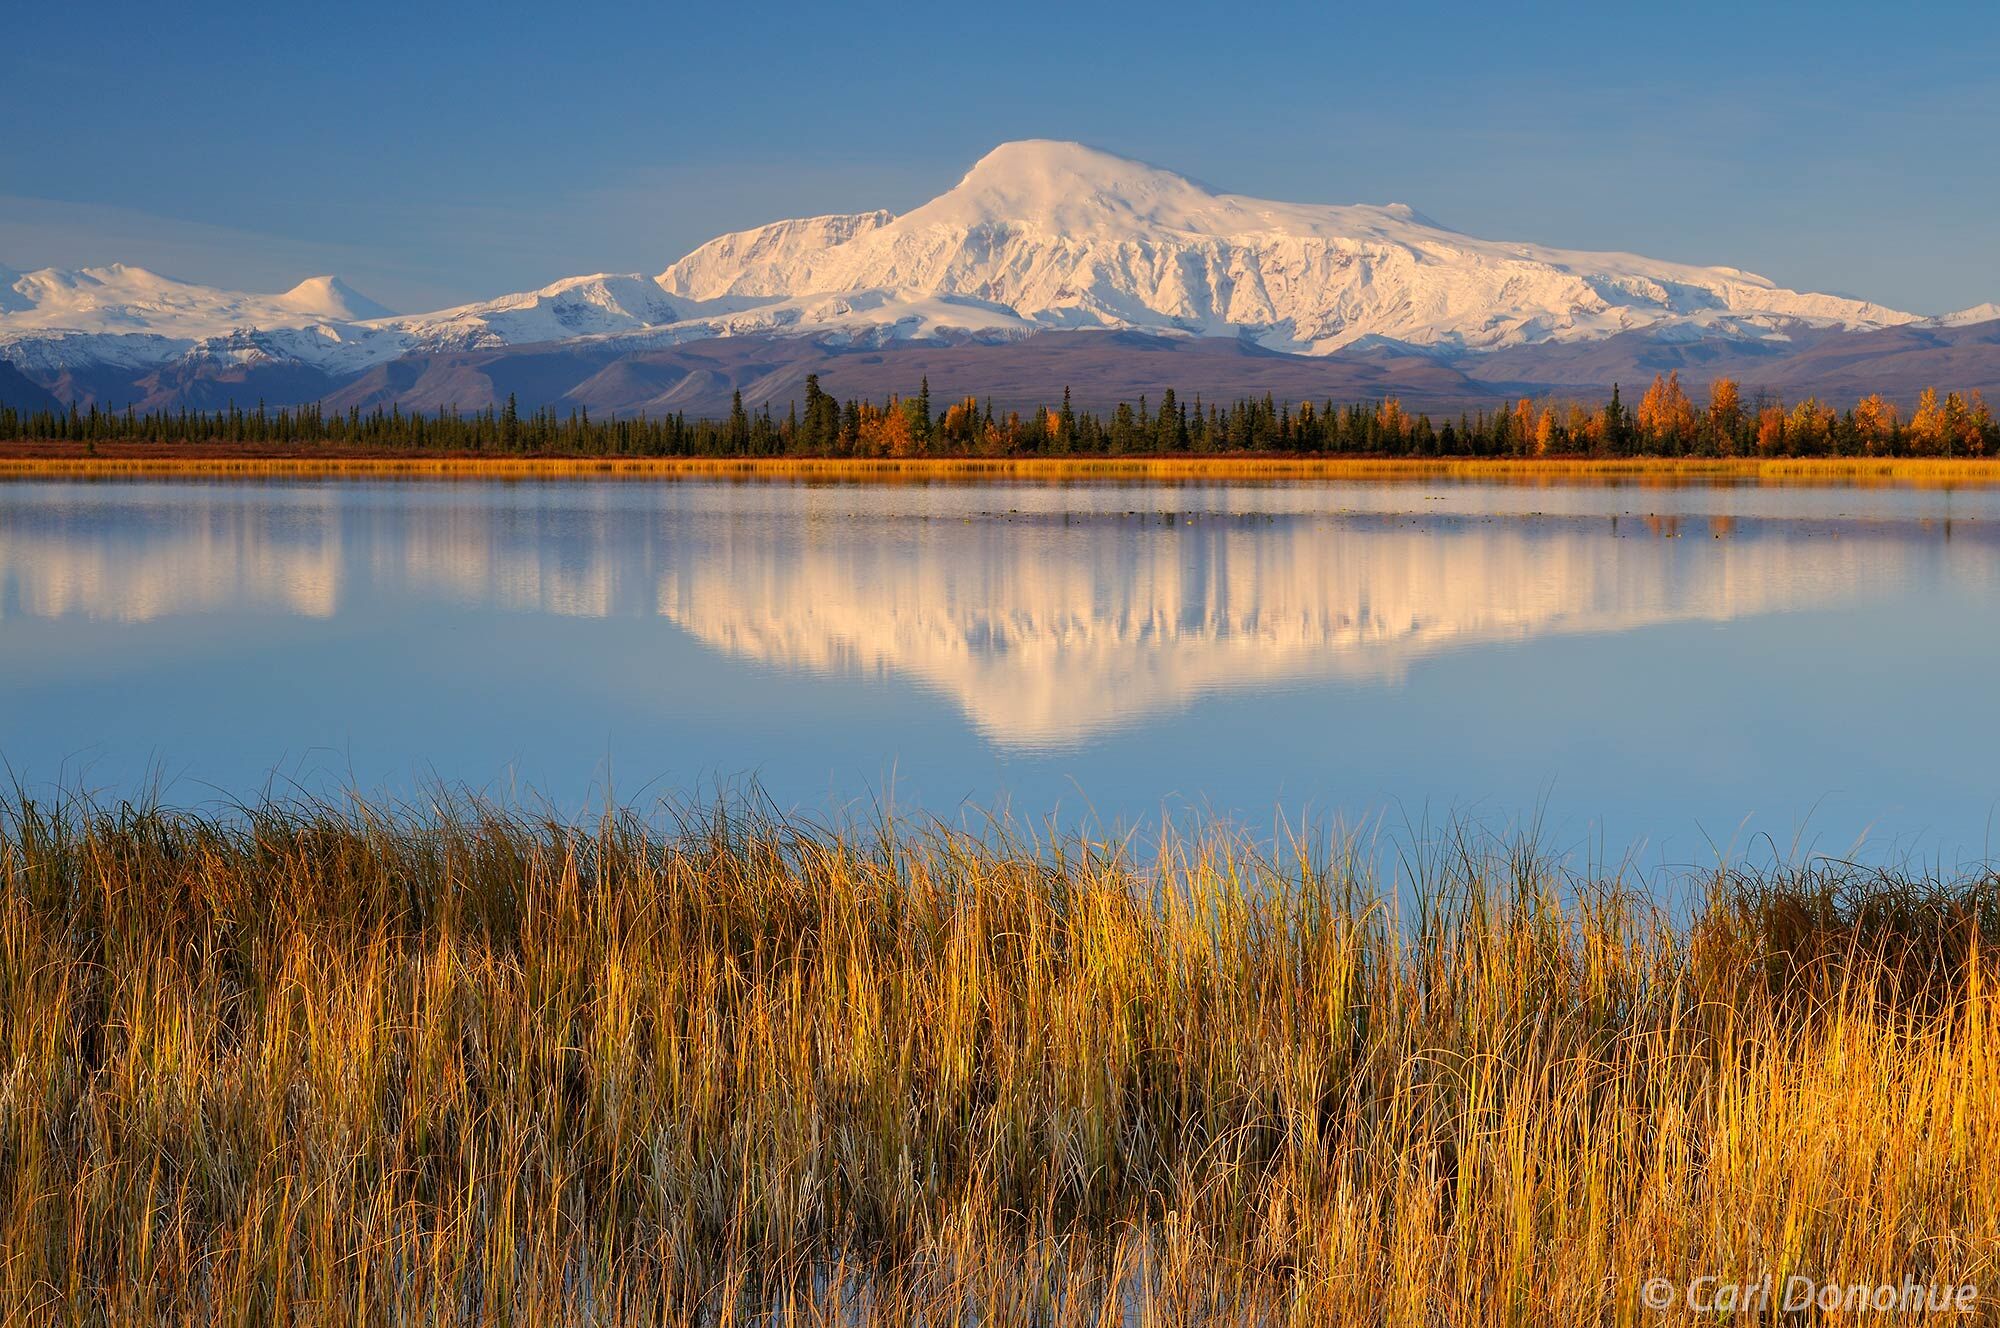 Mt Sanford and reflection in a small kettle pond, Fall colors on the tundra and Mt Zanetti in the background. Wrangell-St. Elias...